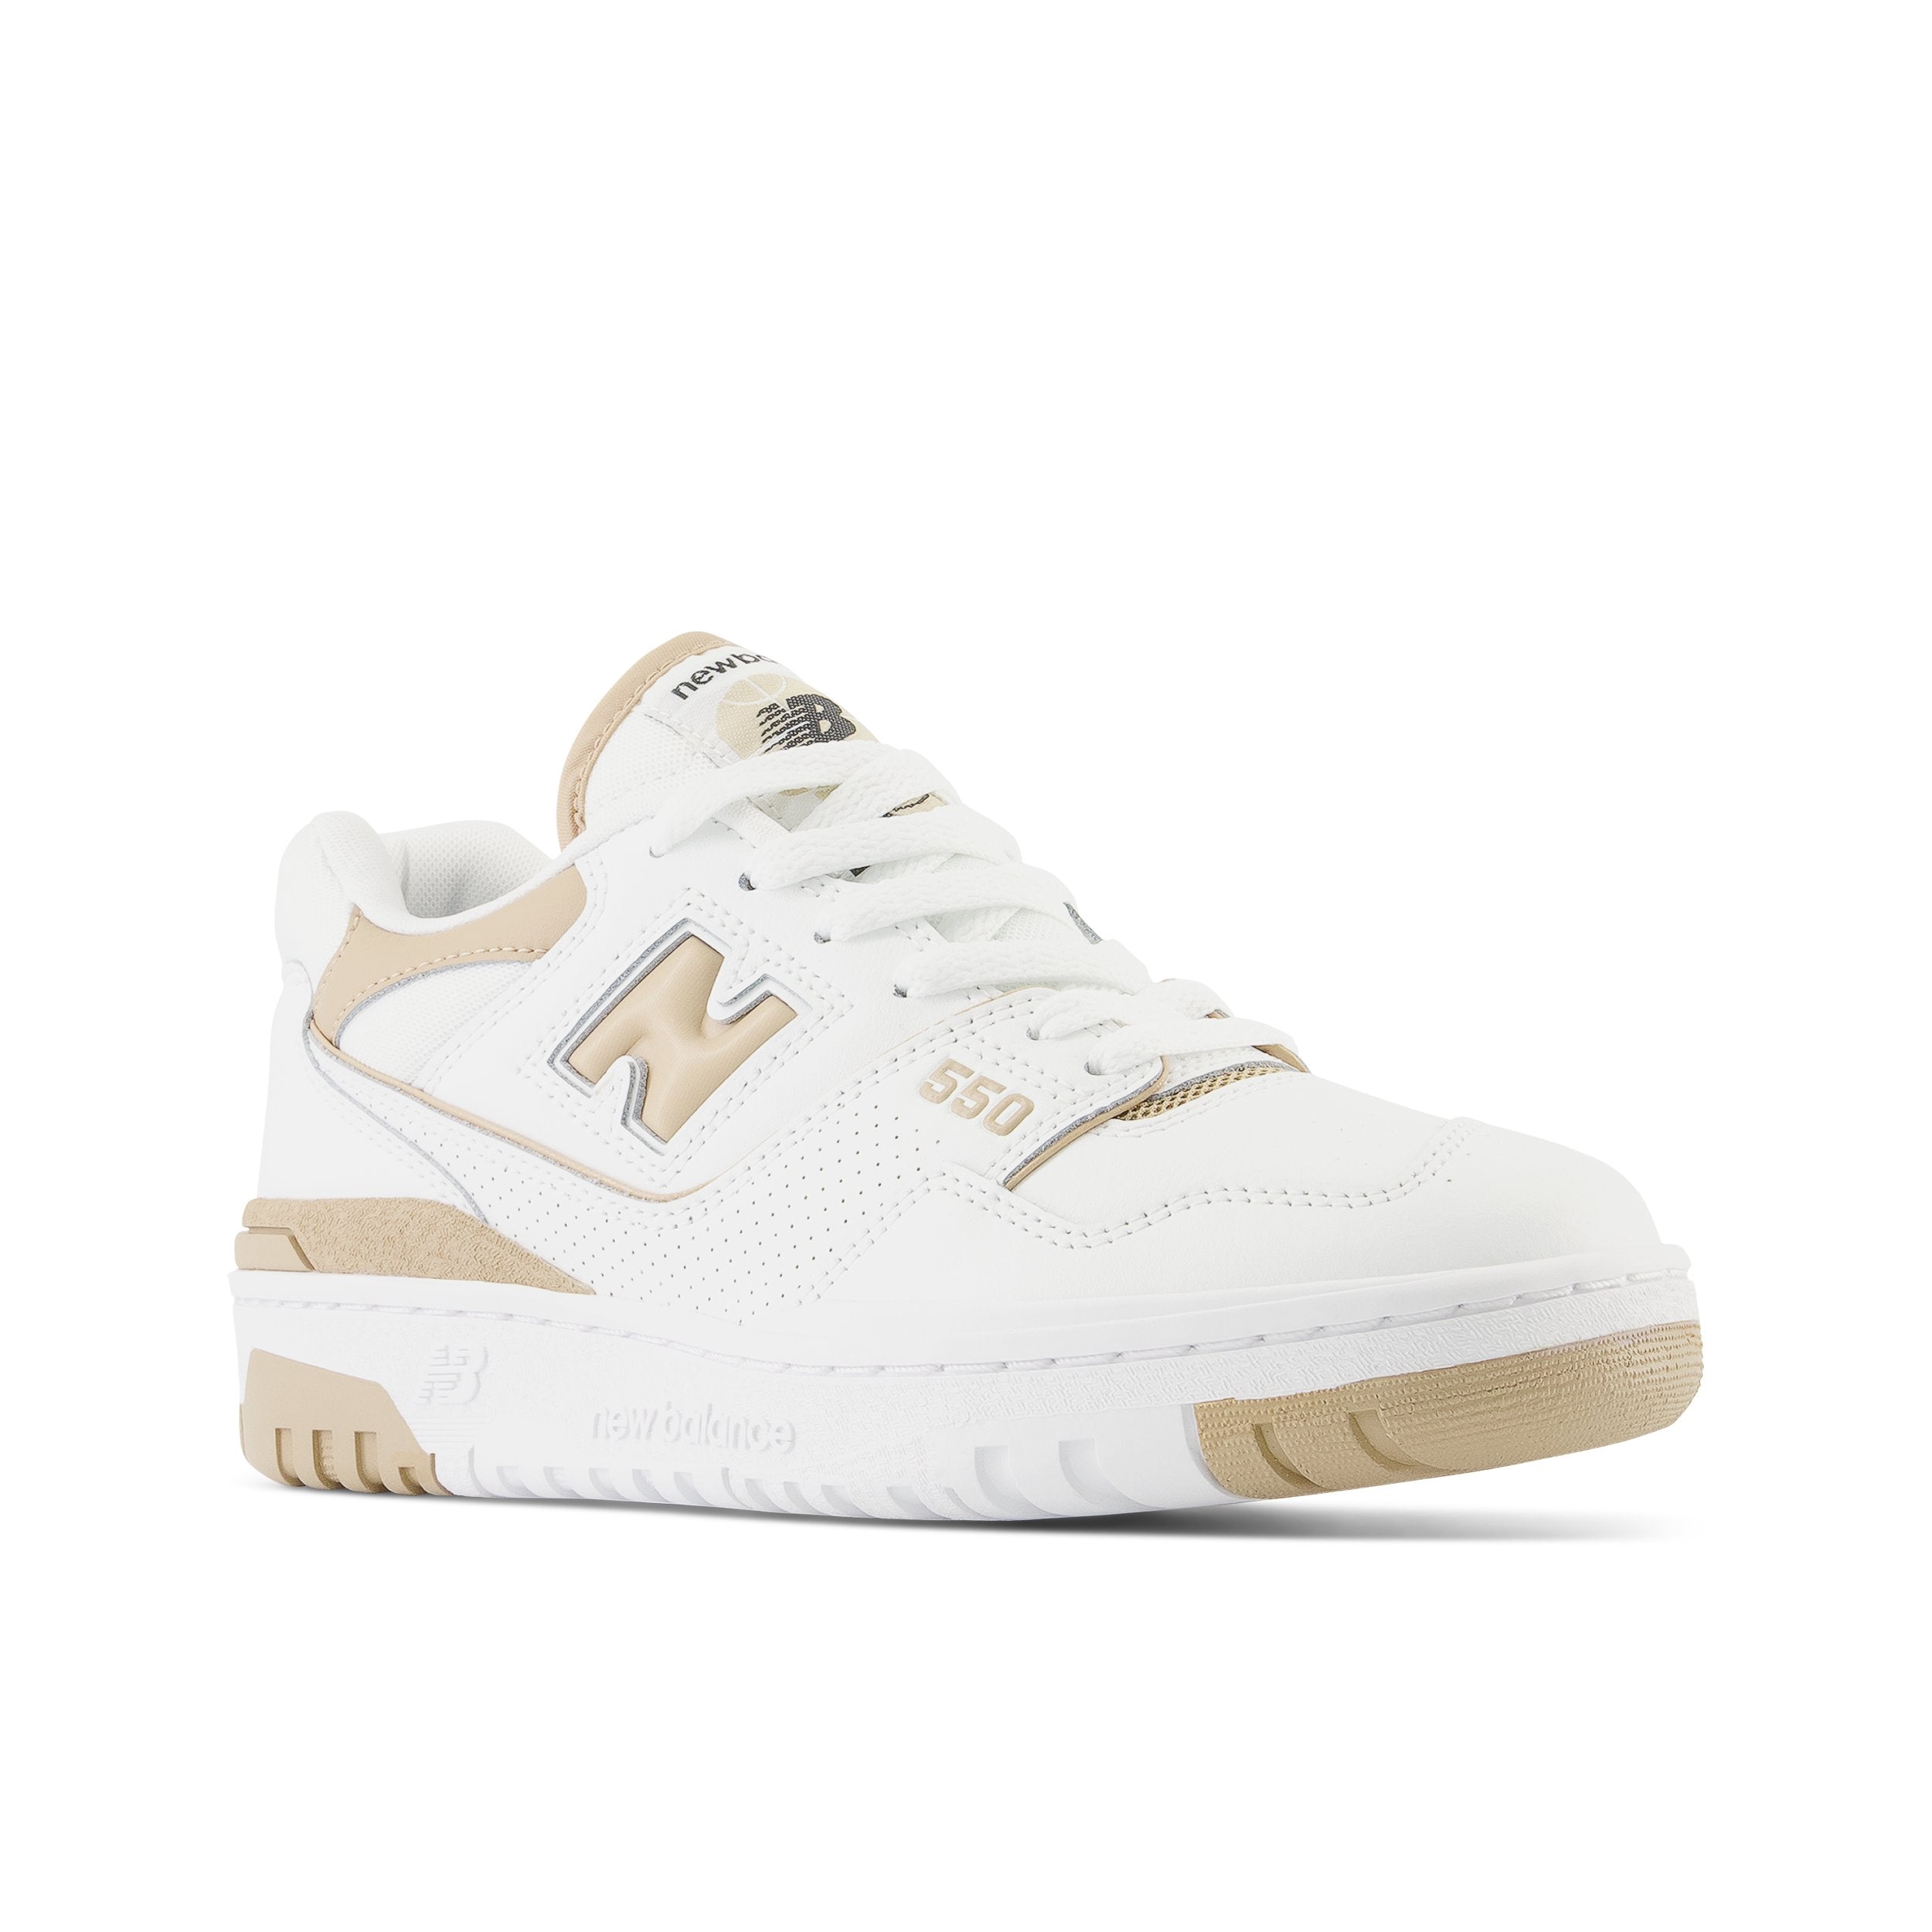 NEW BALANCE-Women's Sneakers 550-White/Incense